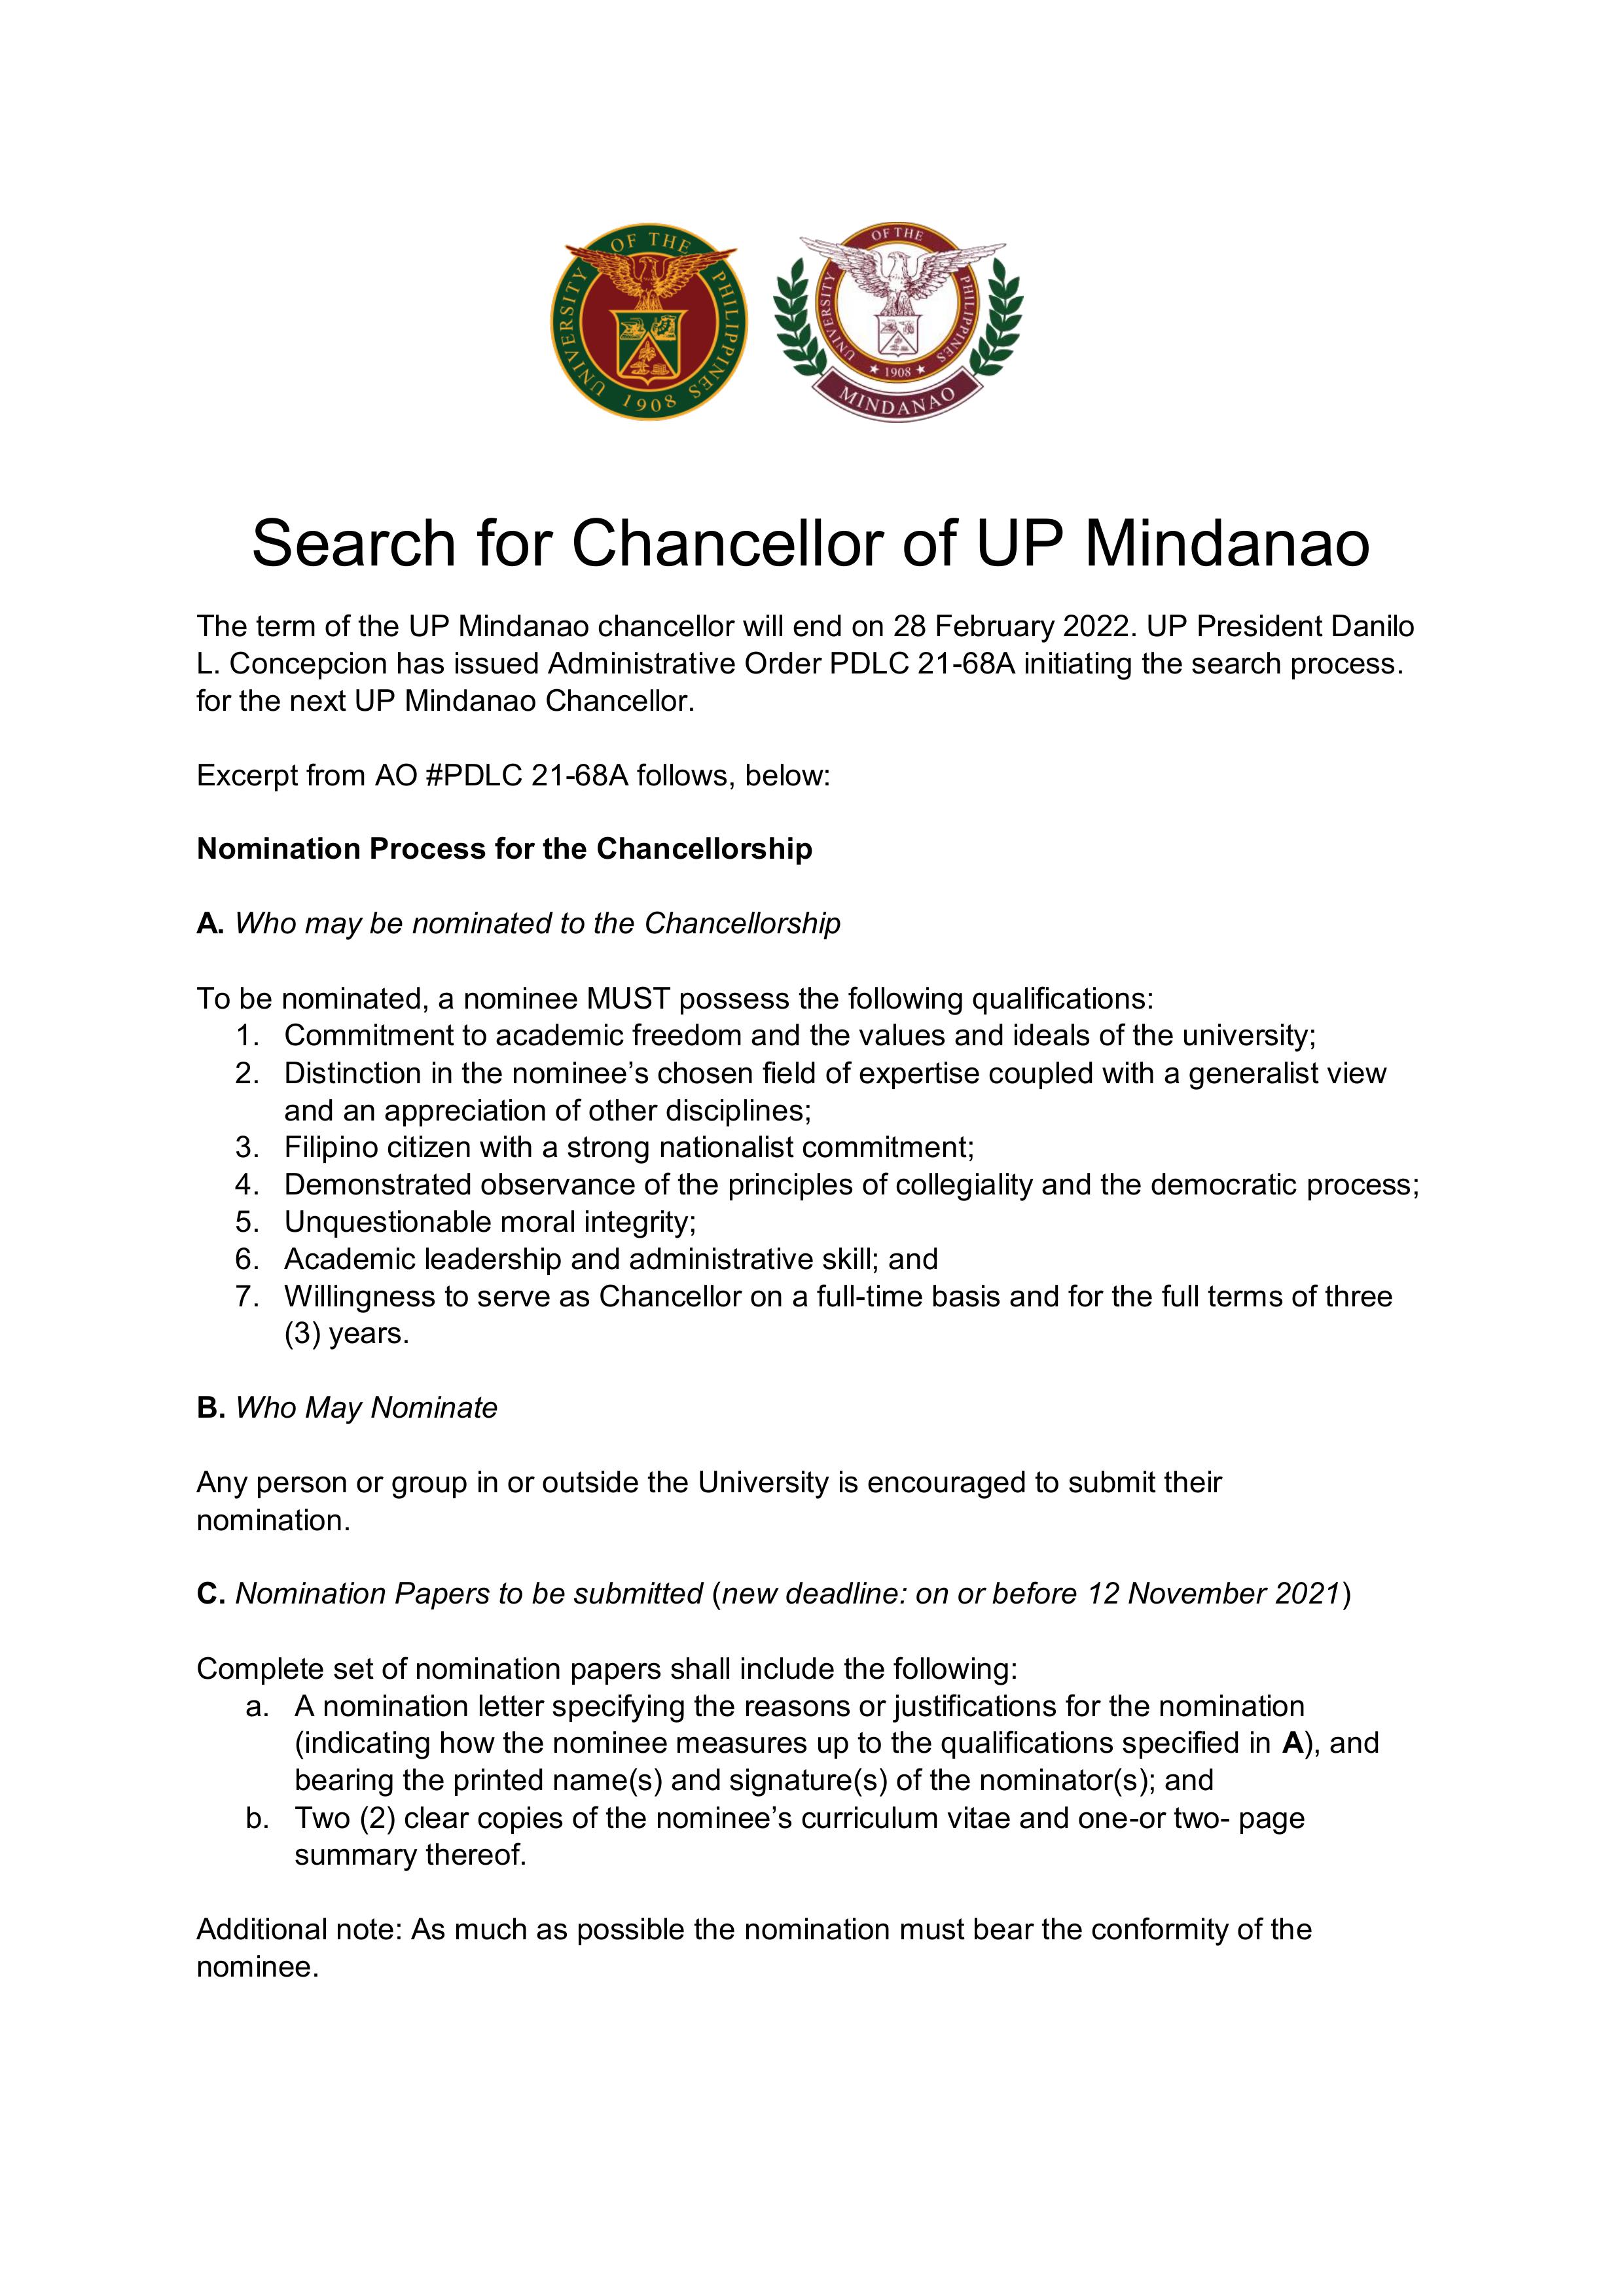 Timeline of activities for the search of Chancellor UPMindanao November 2021-1